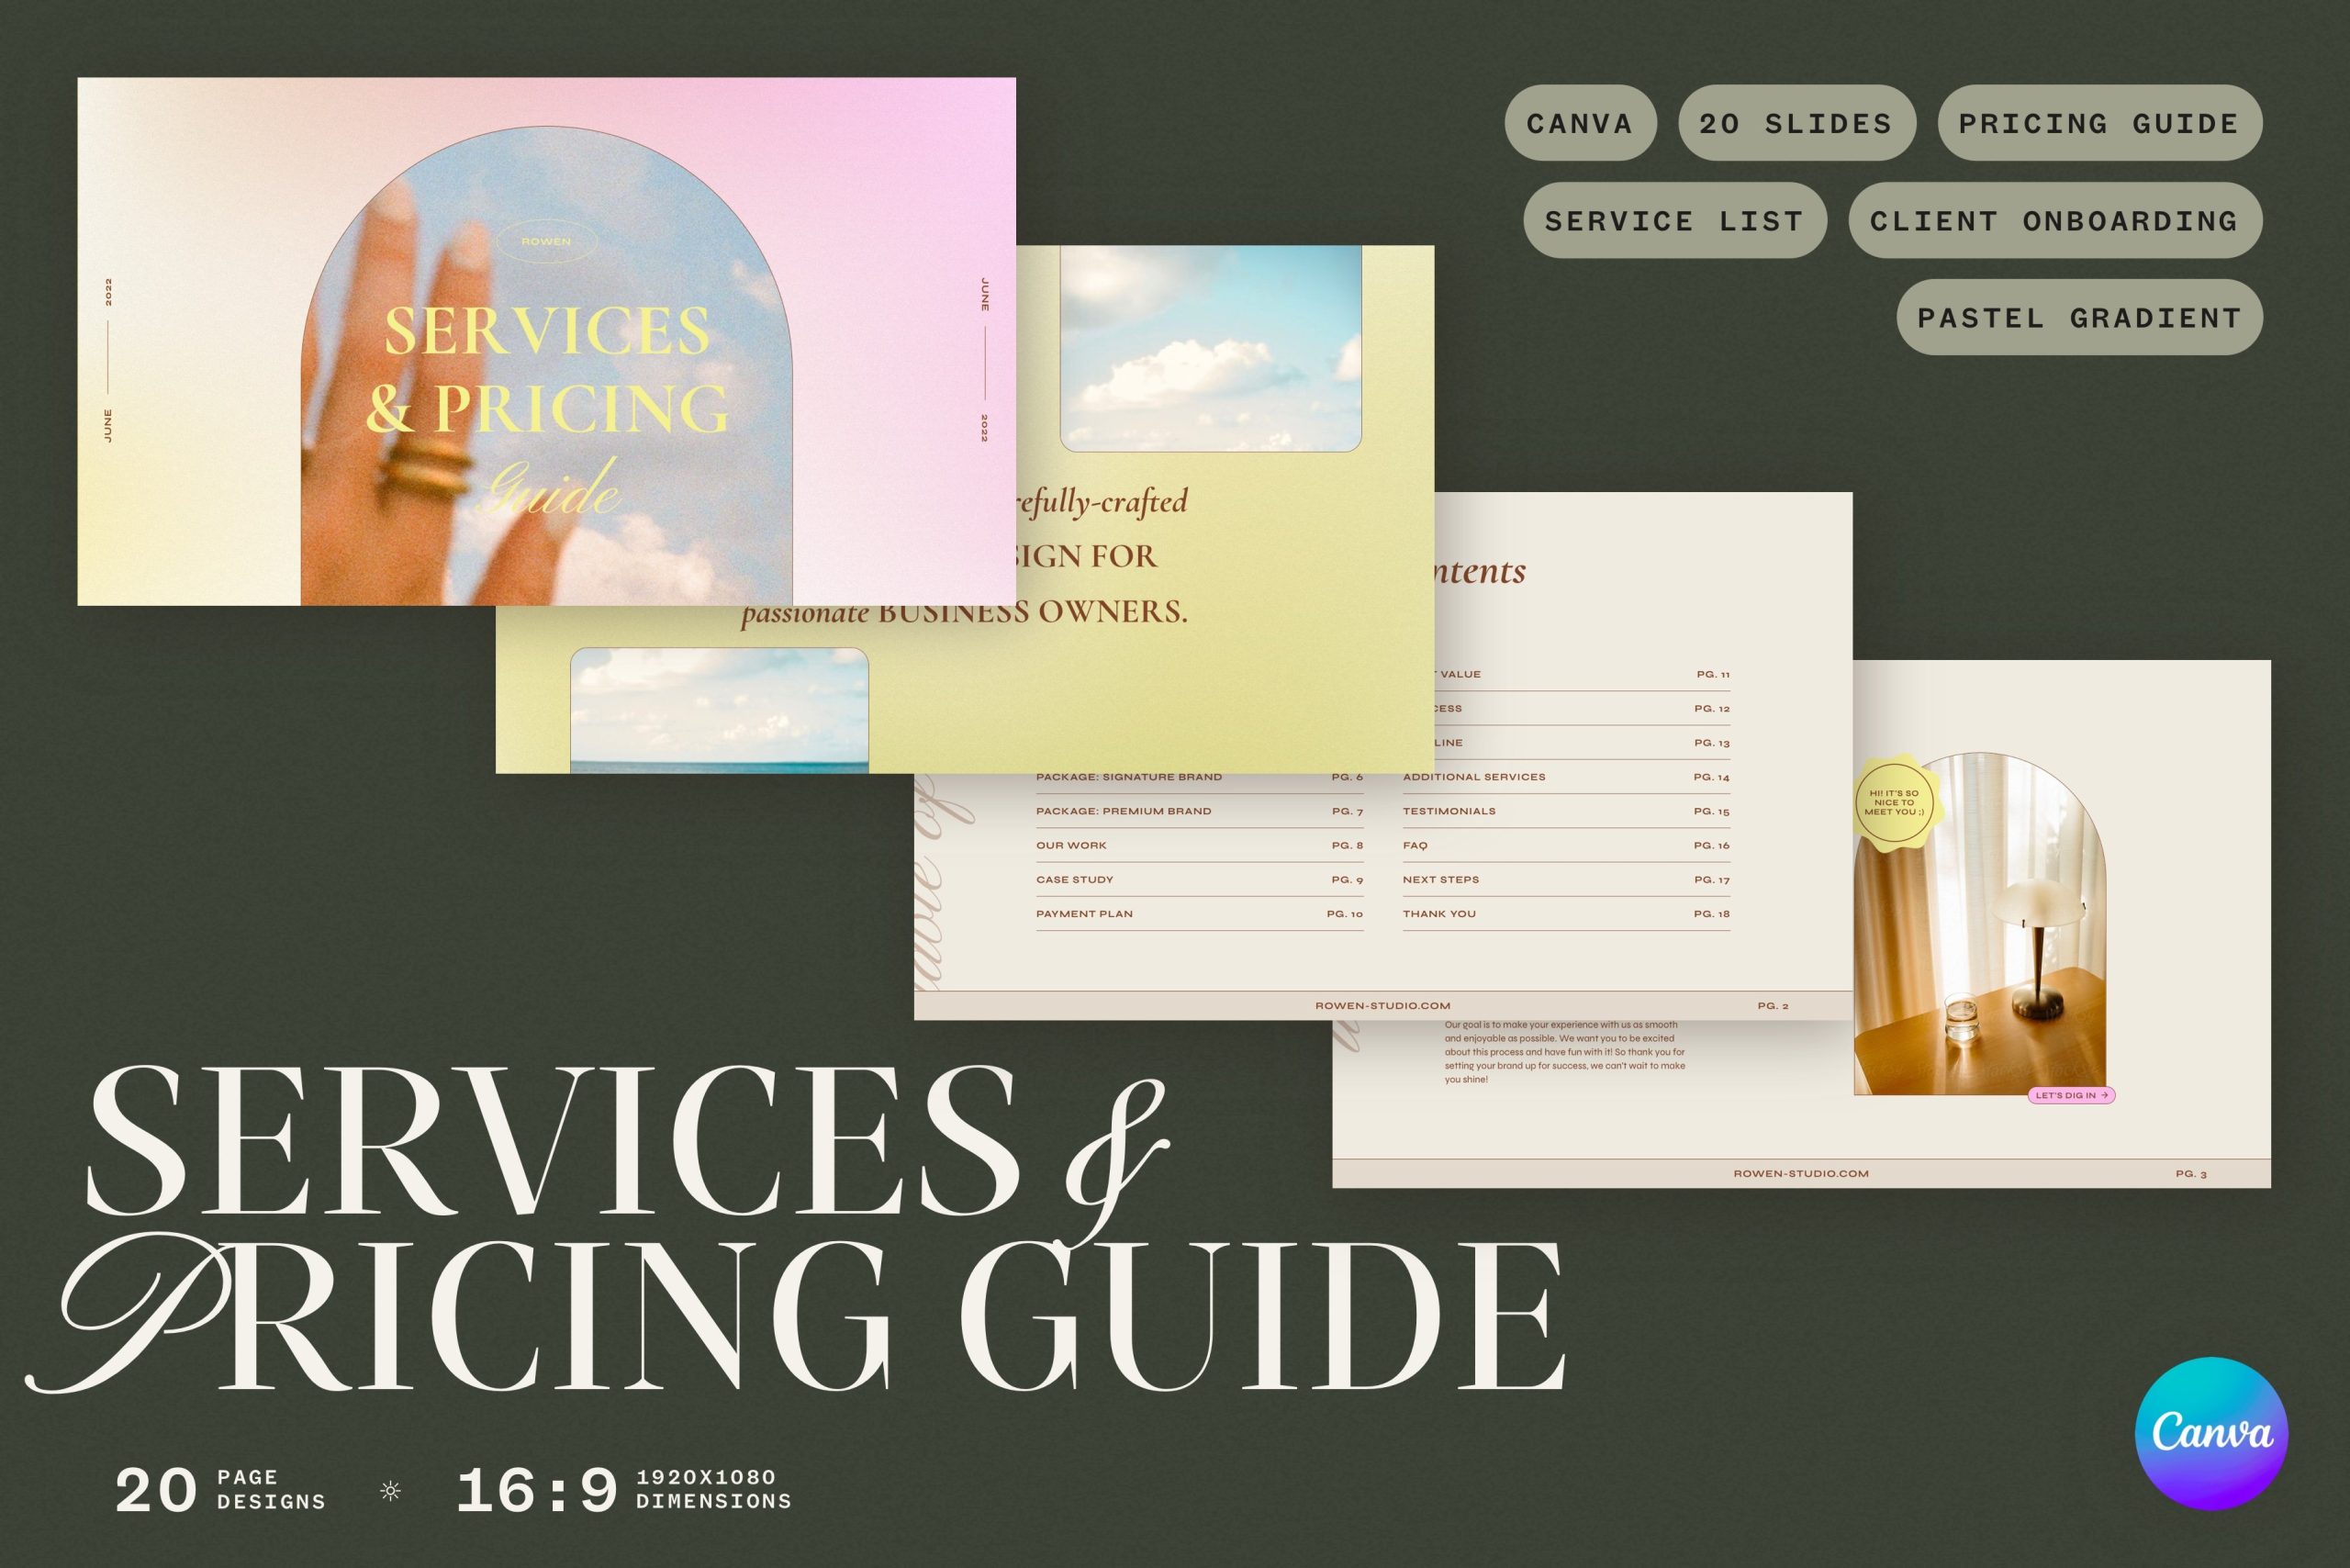 Services and Pricing Guide Canva 20页完全可定制的 Canva 在线模板和主题/设计模板 幻灯图表 第1张